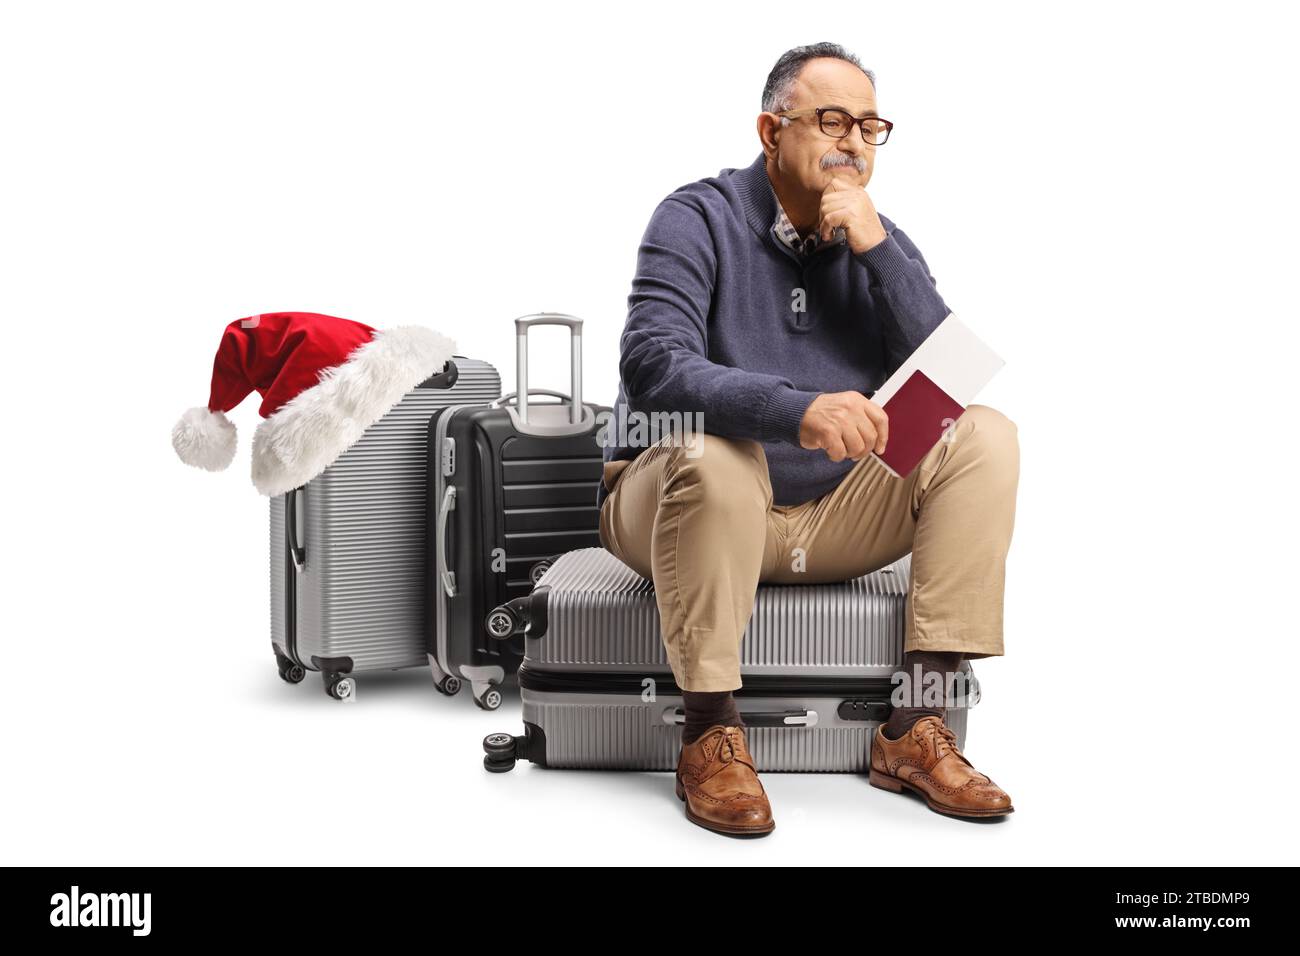 Pensive mature man sitting on a suitcase and waiting with a passport, delayed christmas flight concept Stock Photo